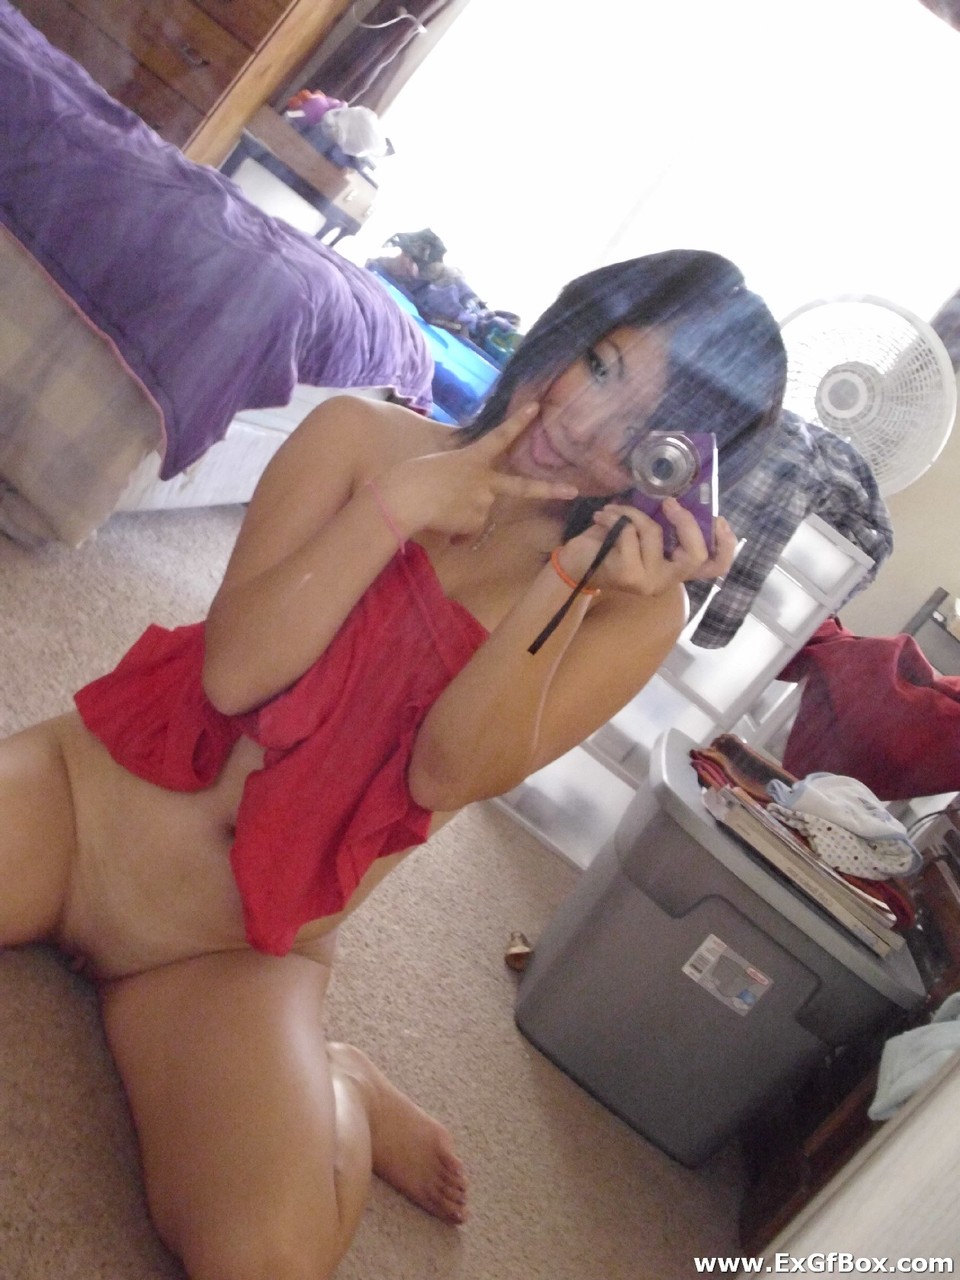 Bootylicious teenage girlfriend takes selfies of her hot body while stripping foto porno #426010469 | Ex GF Box Pics, Selfie, porno mobile